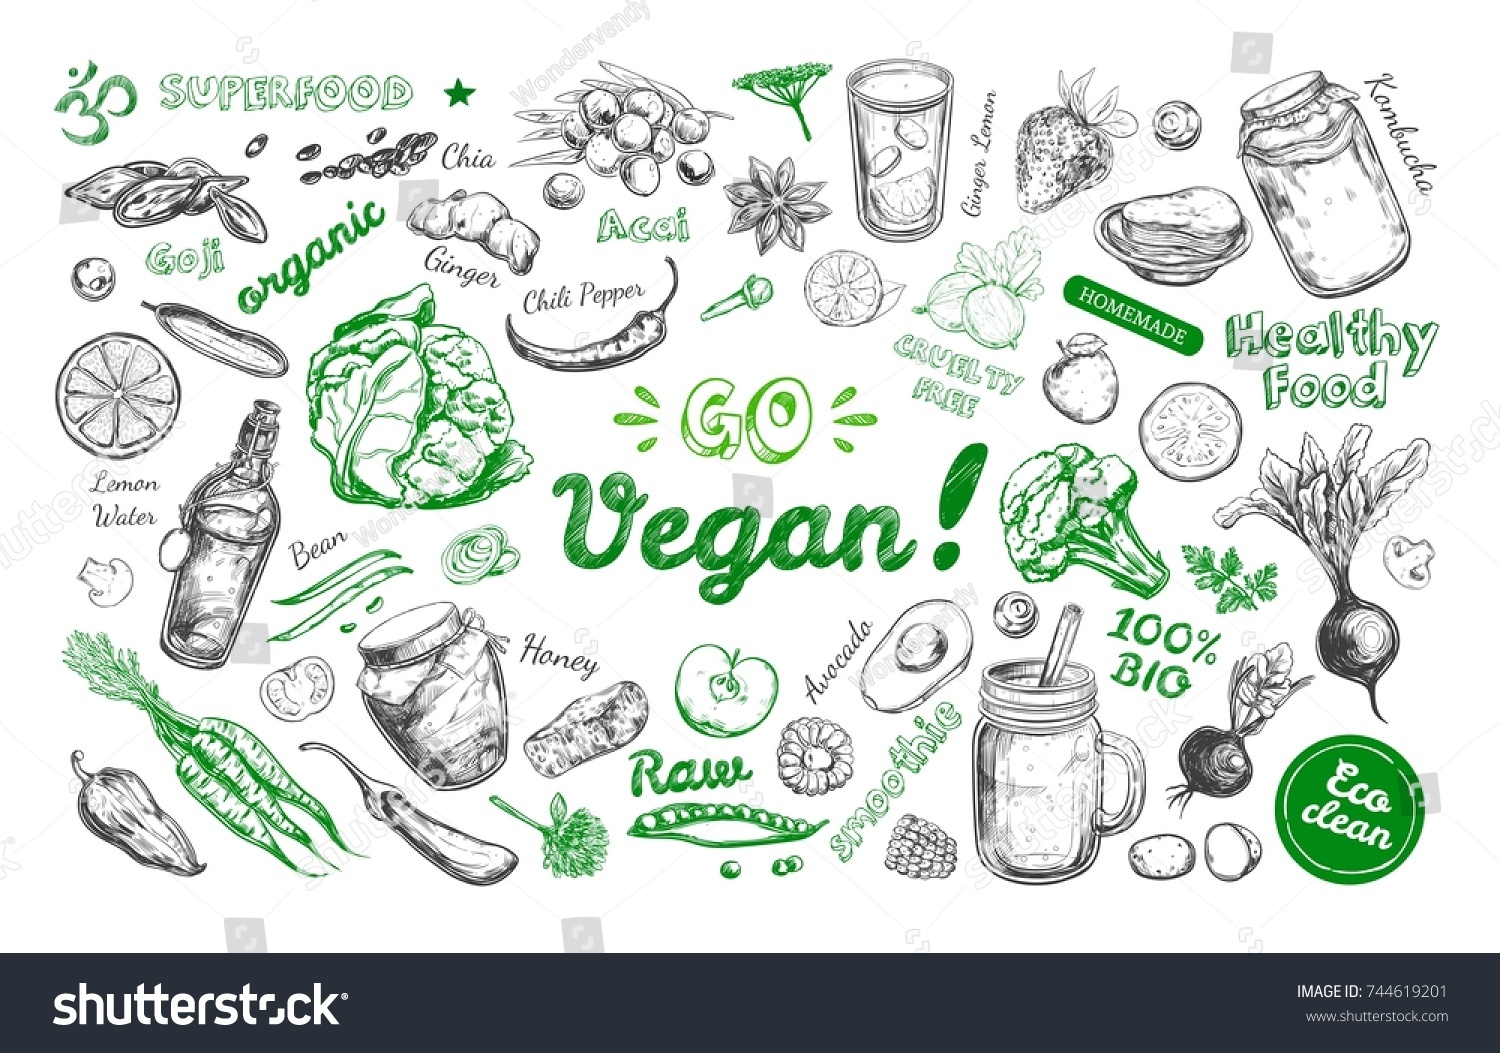 Go vegan. Healthy food. Vegetarian Big Set. Vector hand drawn isolated elements on white. Sketch style #744619201